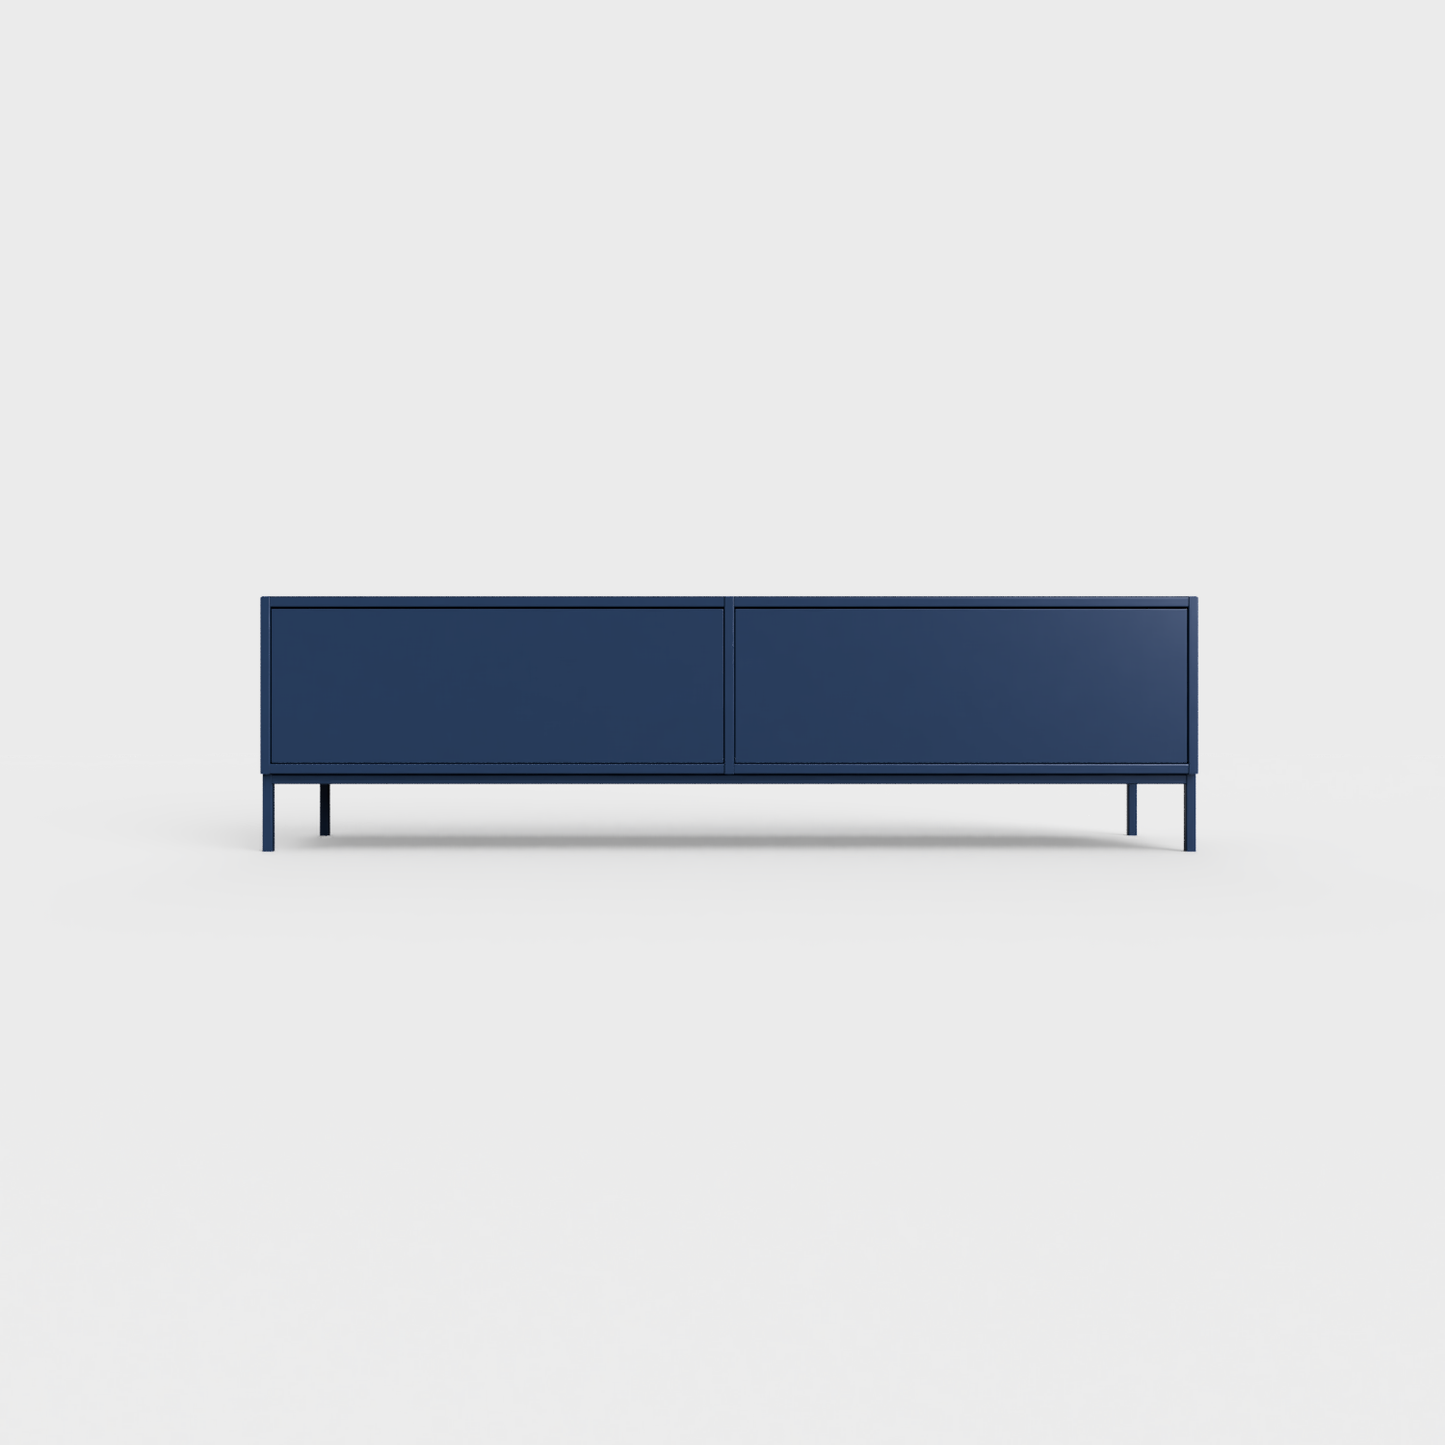 Prunus 01 Lowboard in prussian blue color, powder-coated steel, elegant and modern piece of furniture for your living room